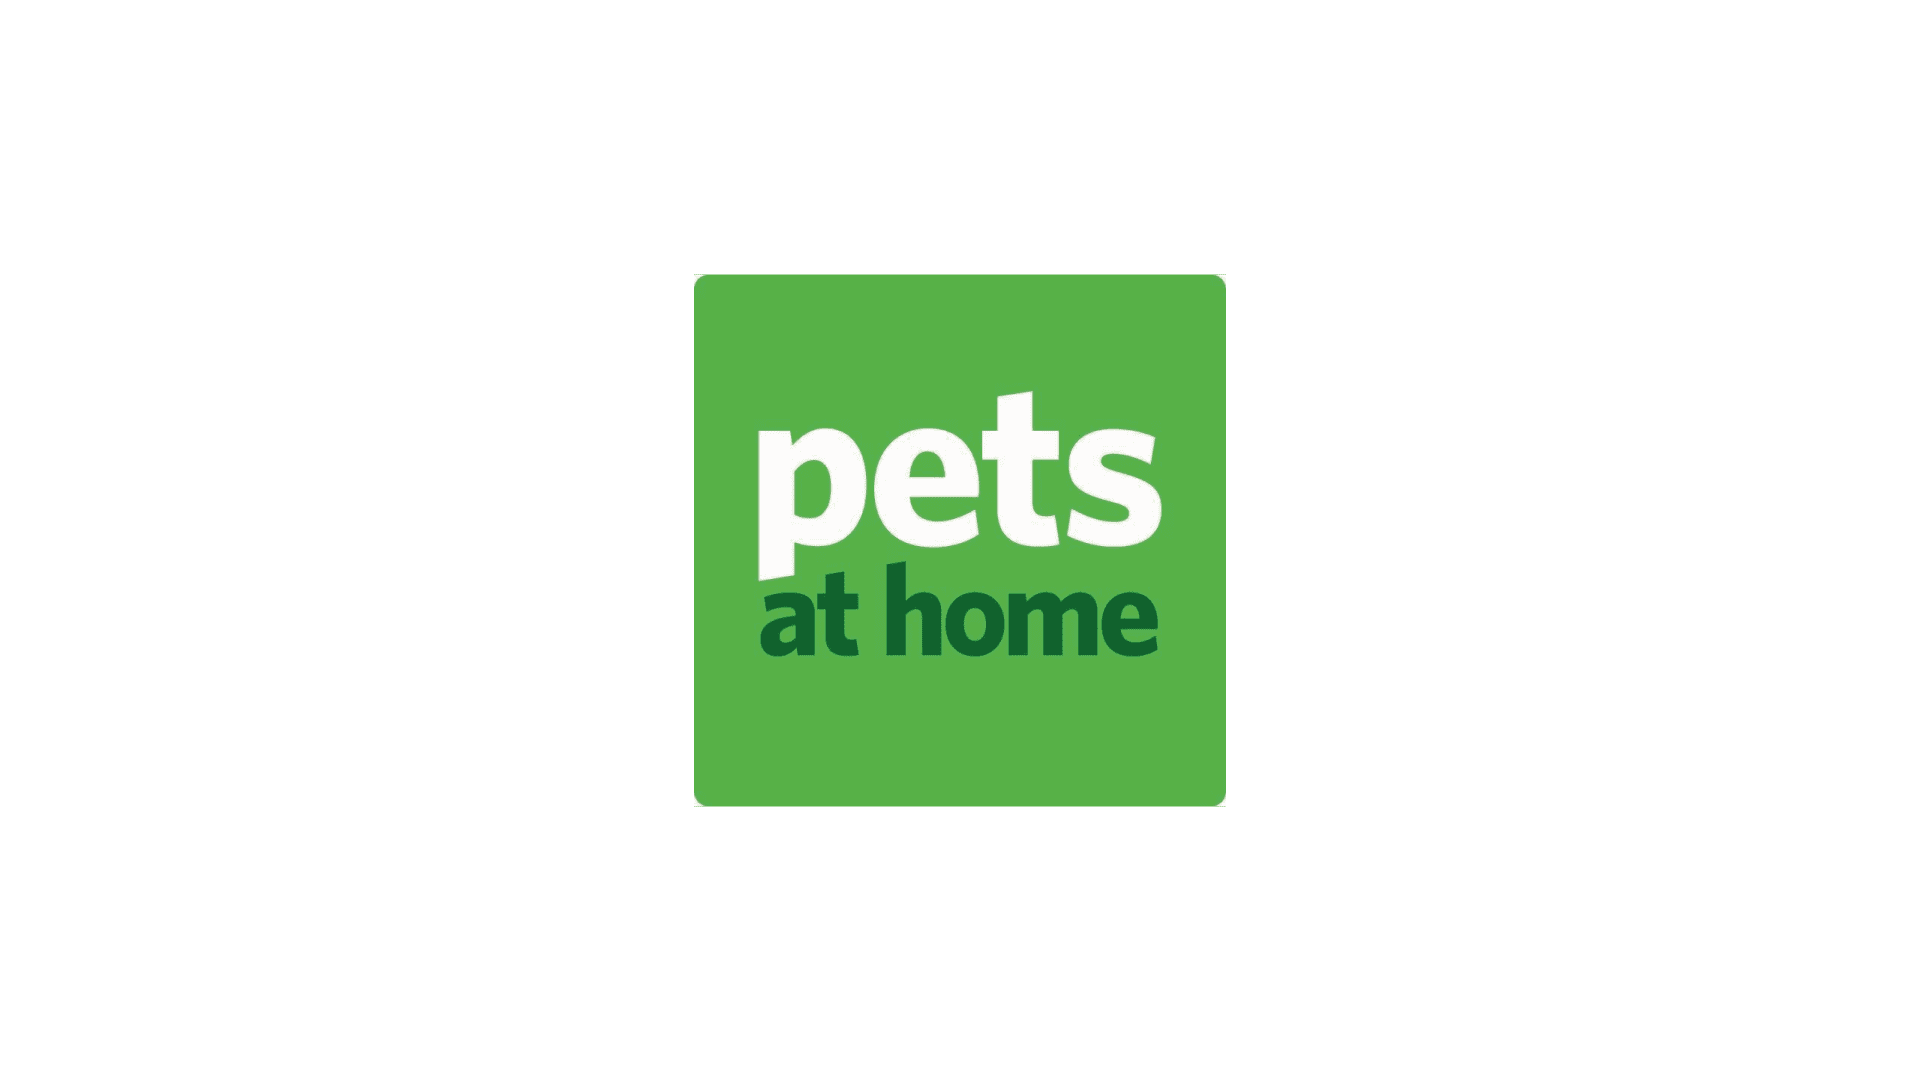 Pets at Home work with CADS